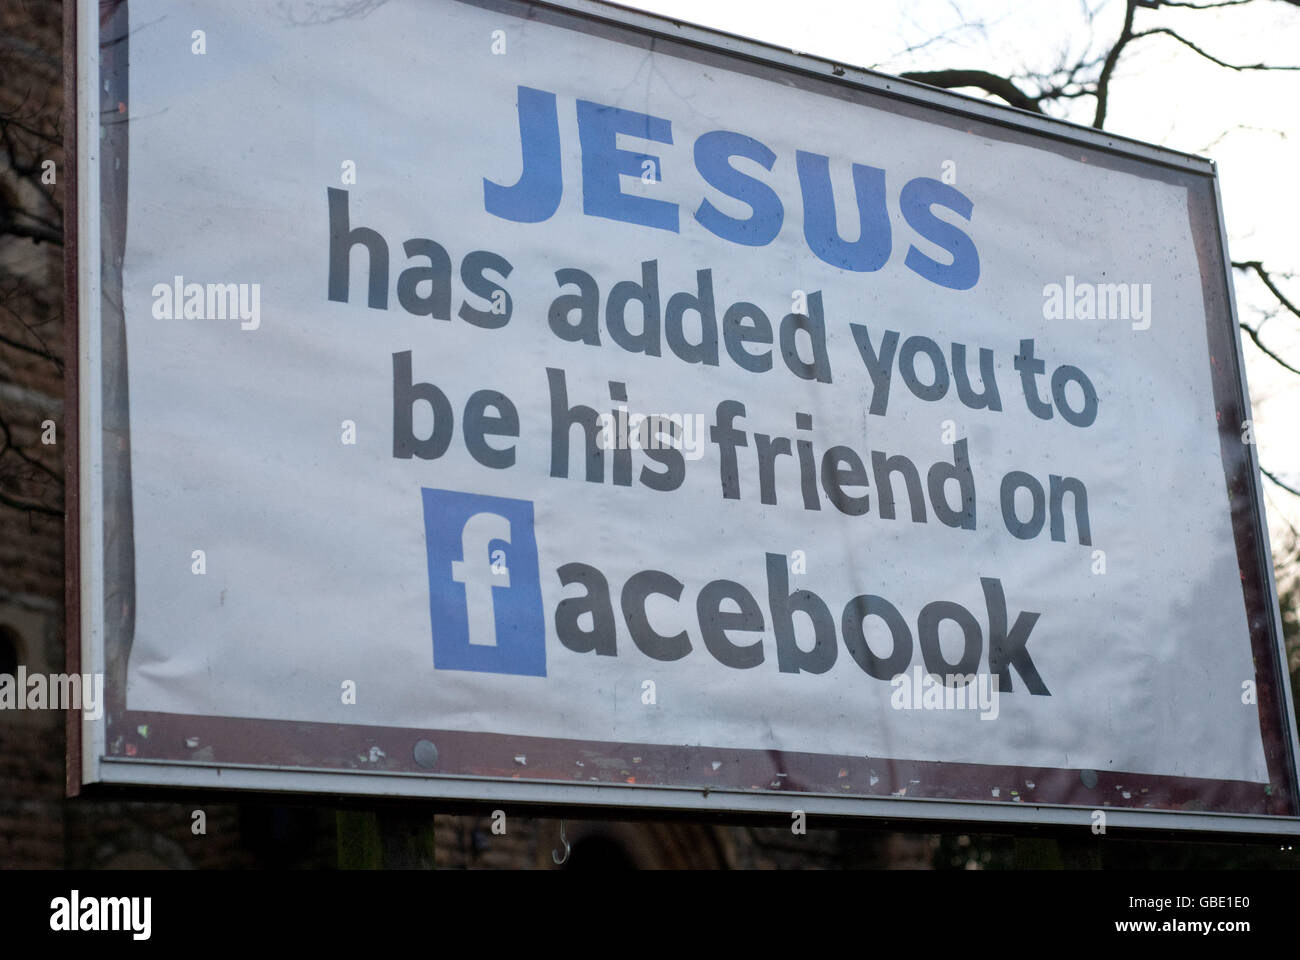 A poster announcing 'Jesus has added you to be his friend on Facebook' outside the St Mary's Parish Church in Radcliffe on Trent, Nottinghamshire. Stock Photo